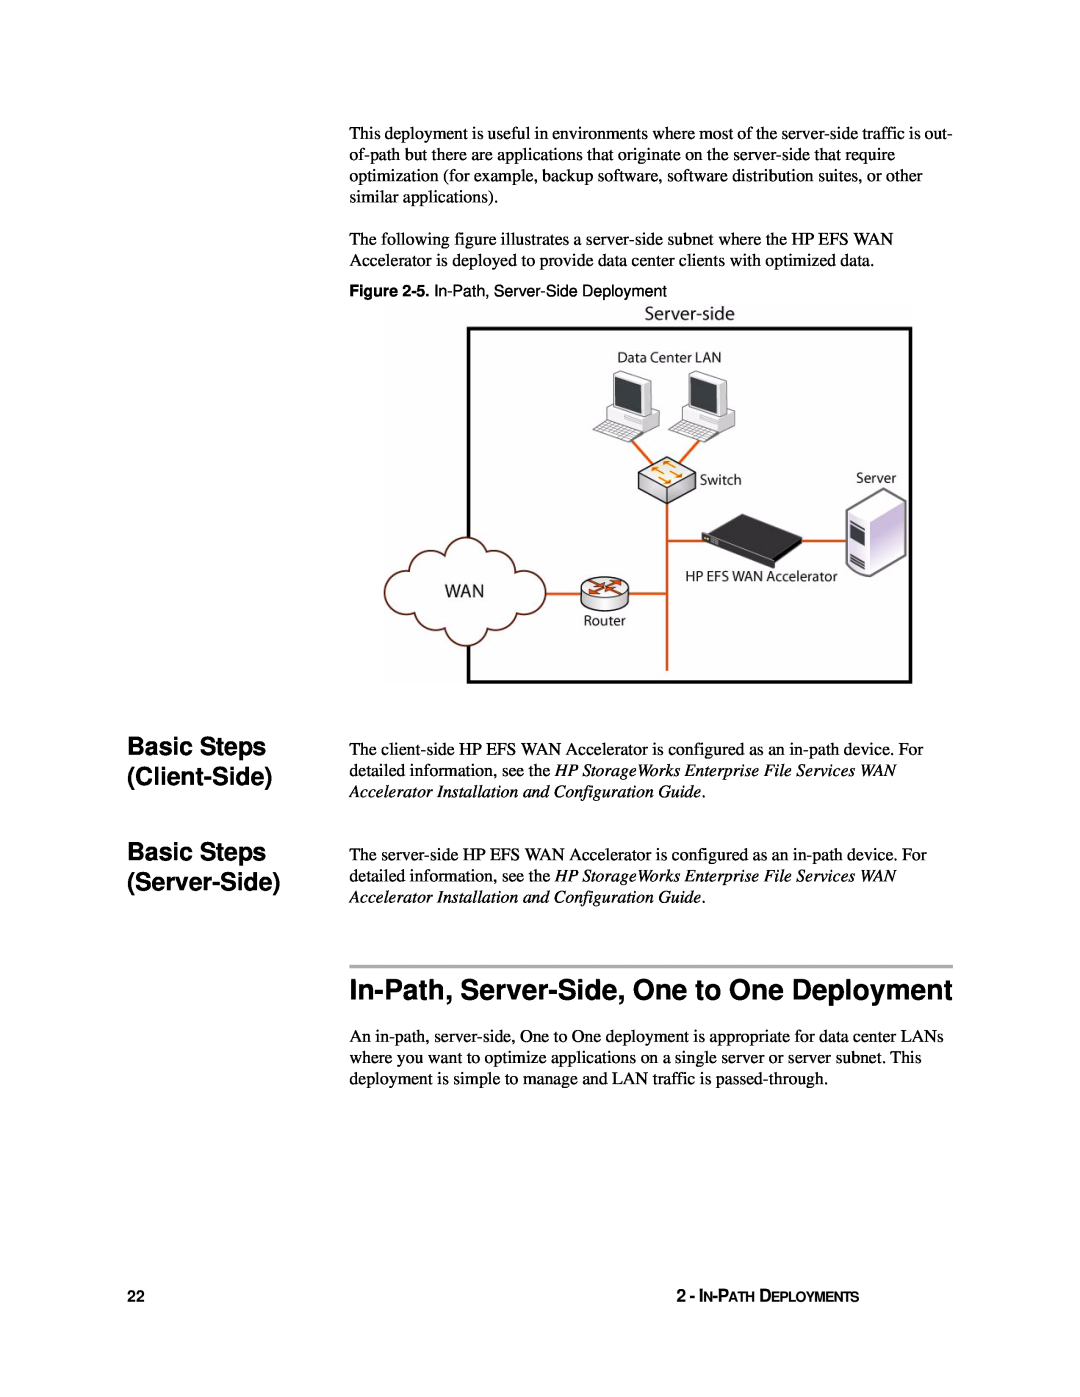 HP Enterprise File Services WAN Accelerator manual In-Path, Server-Side, One to One Deployment 